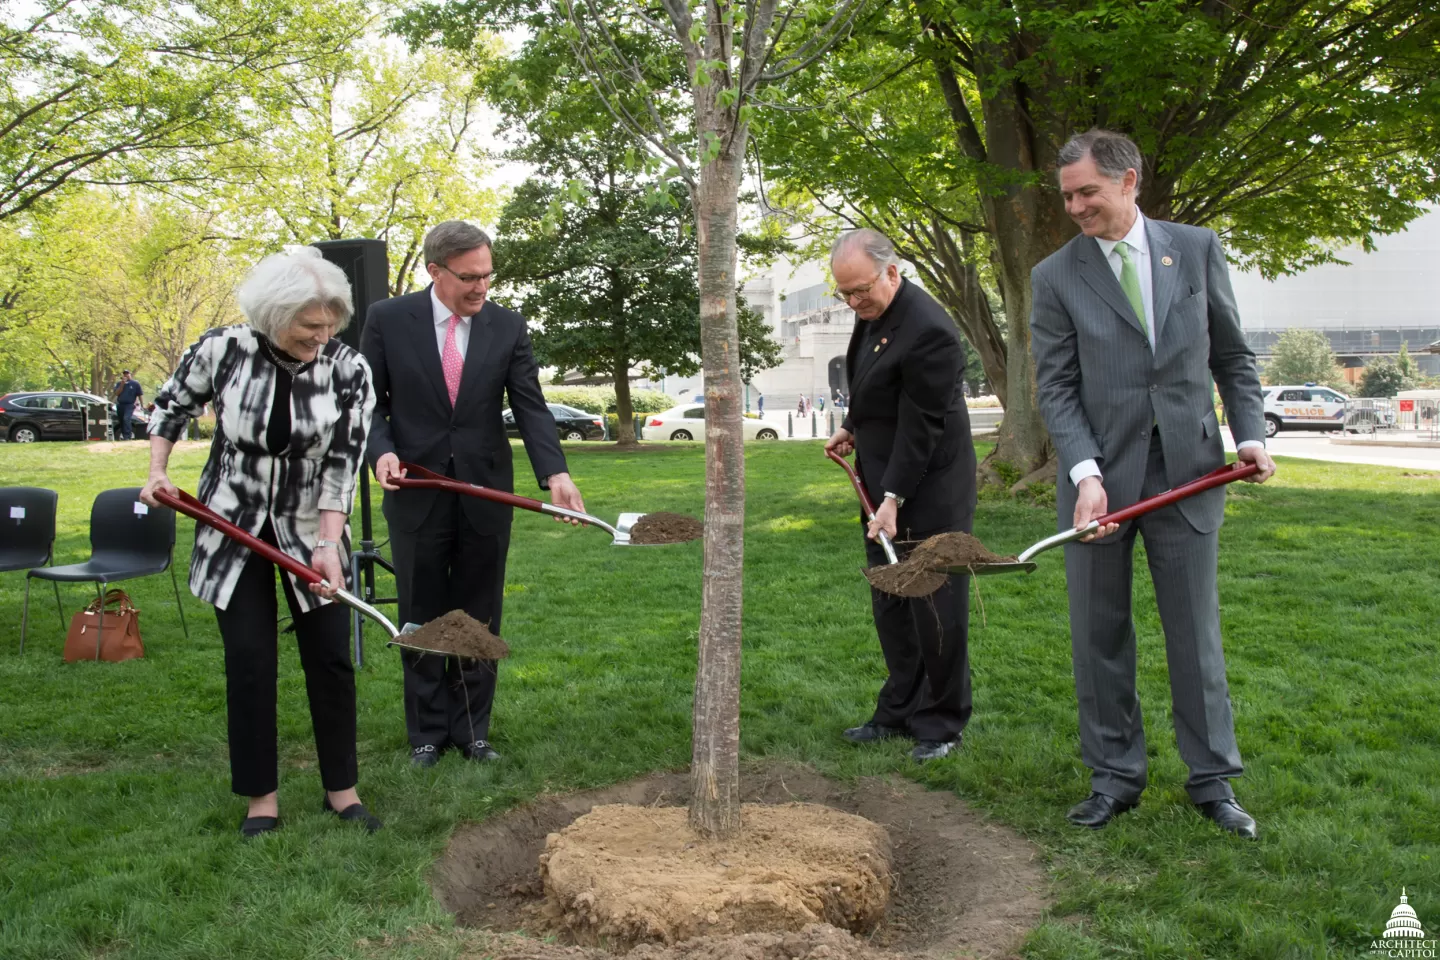 People standing holding shovels around a tree.